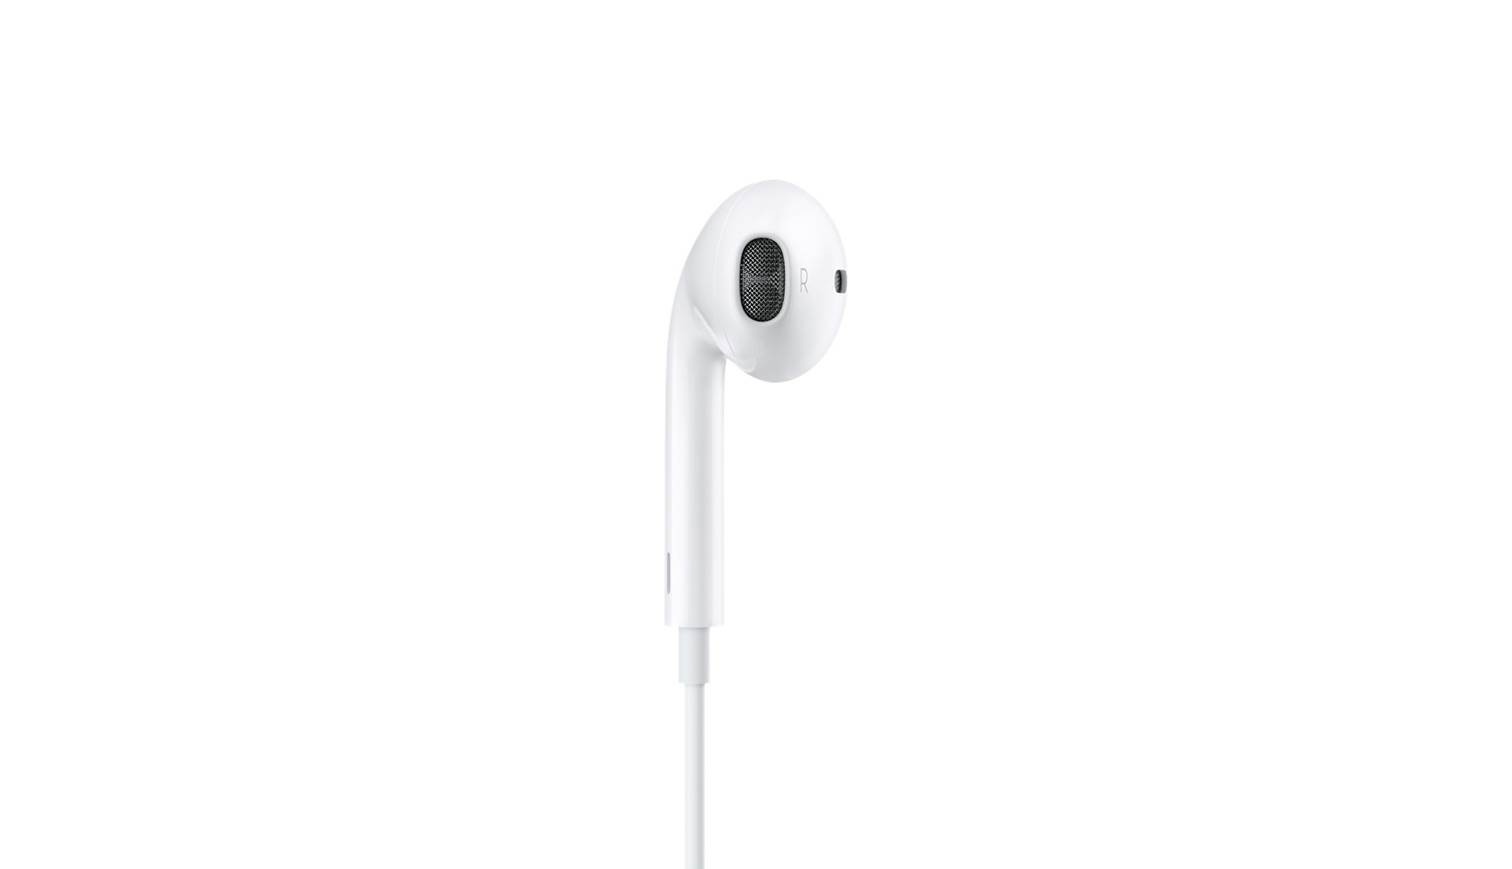 authentic apple earpods with lightning connector